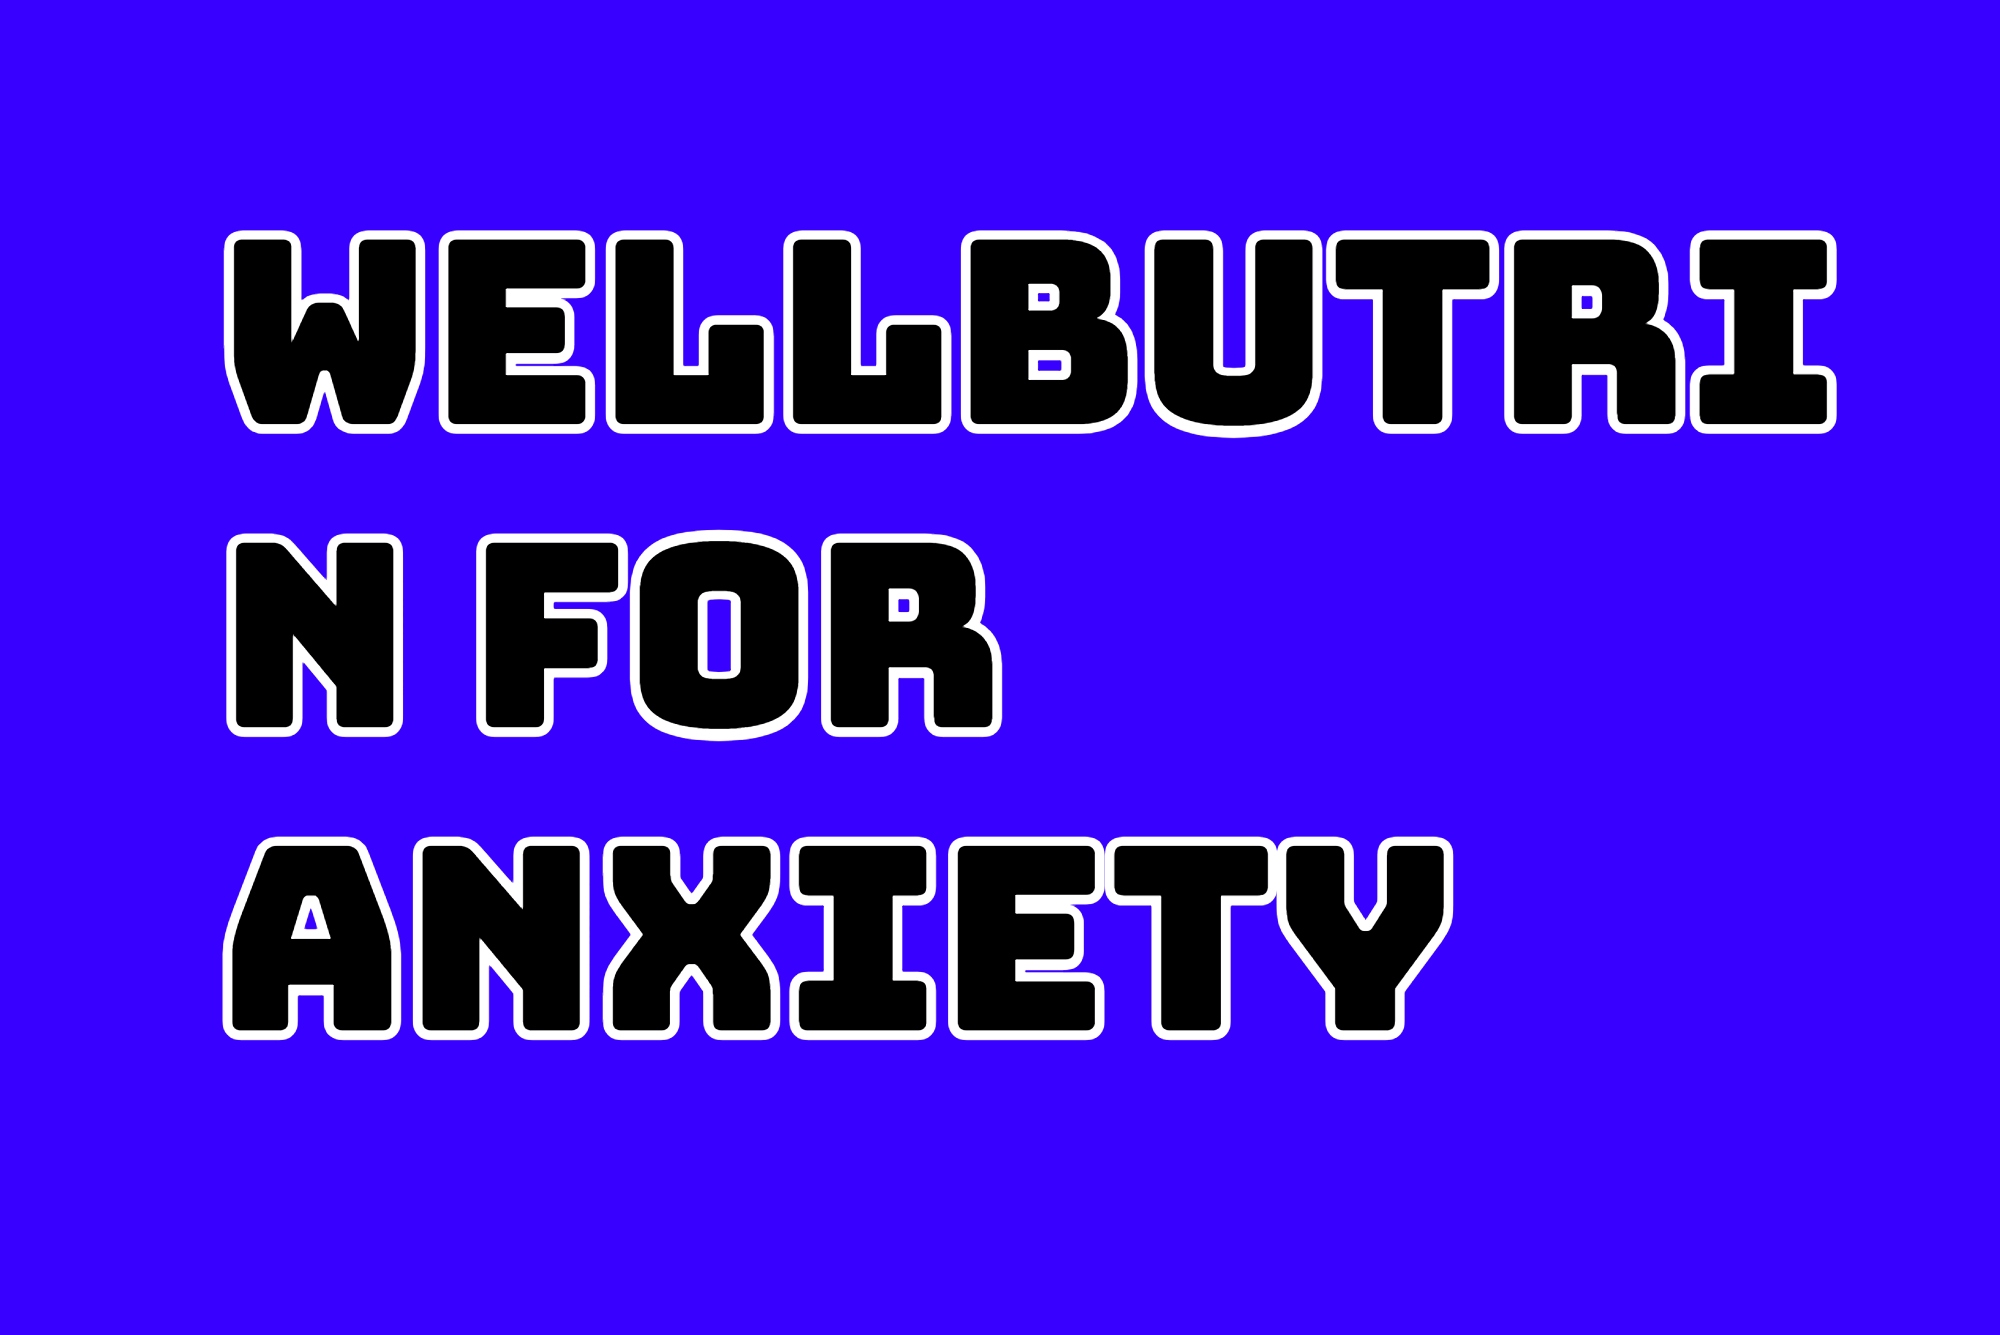 wellbutrin for anxiety